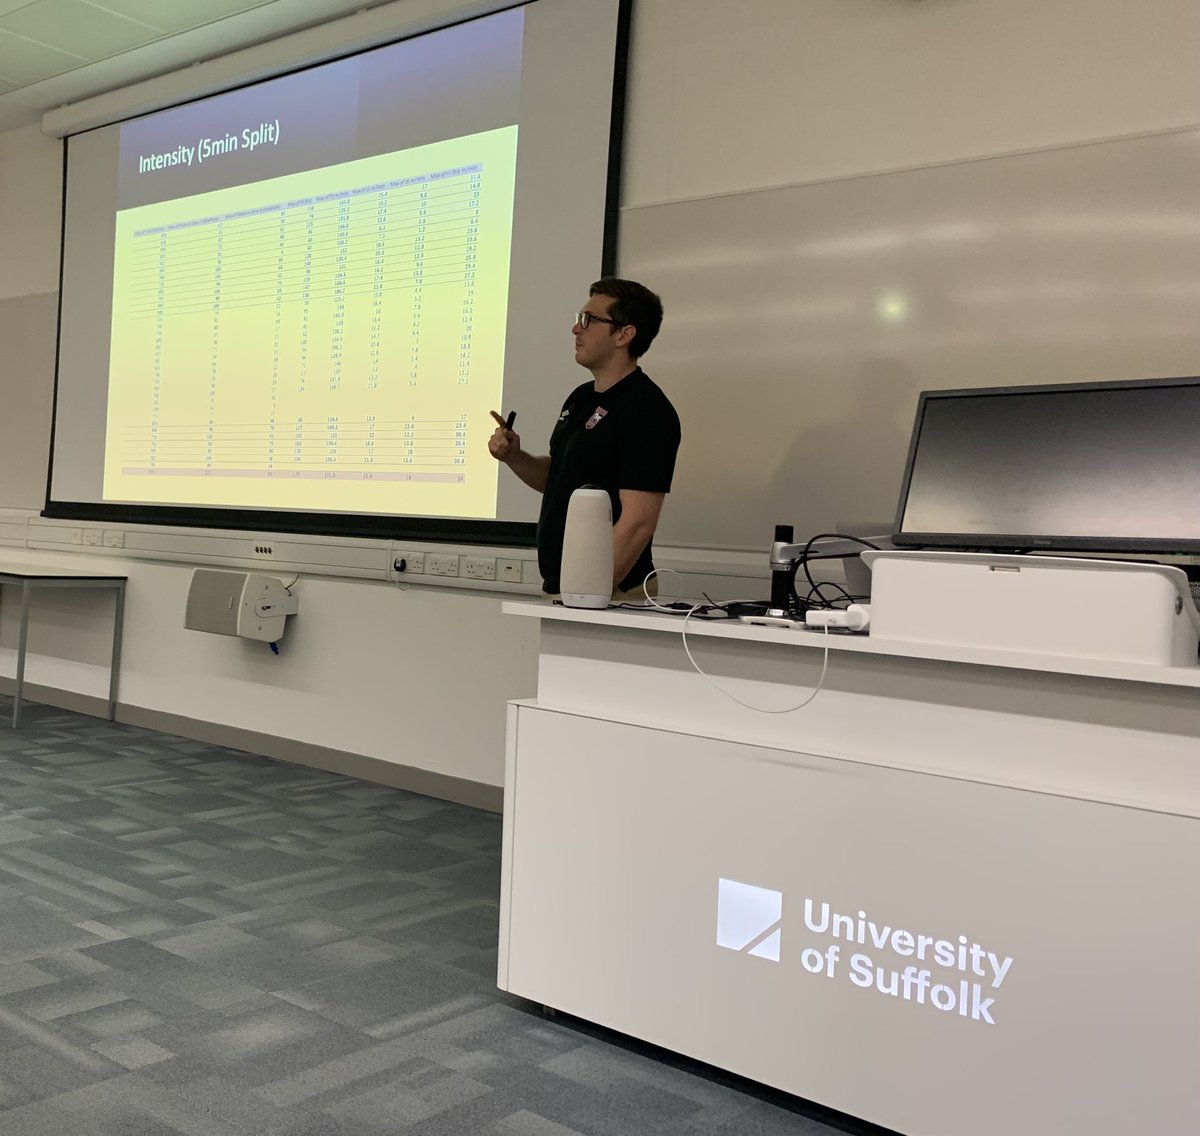 Thank you @AndyCostin5 for your fantastic presentation! @IpswichTown #Symposium in #Sports #Science and #Performance (5th Edition) at the @UniofSuffolk @UOS_SportSci In collaboration with international partners: @statsports, @VALDPerformance, #Desmotec, @Sportsciagency